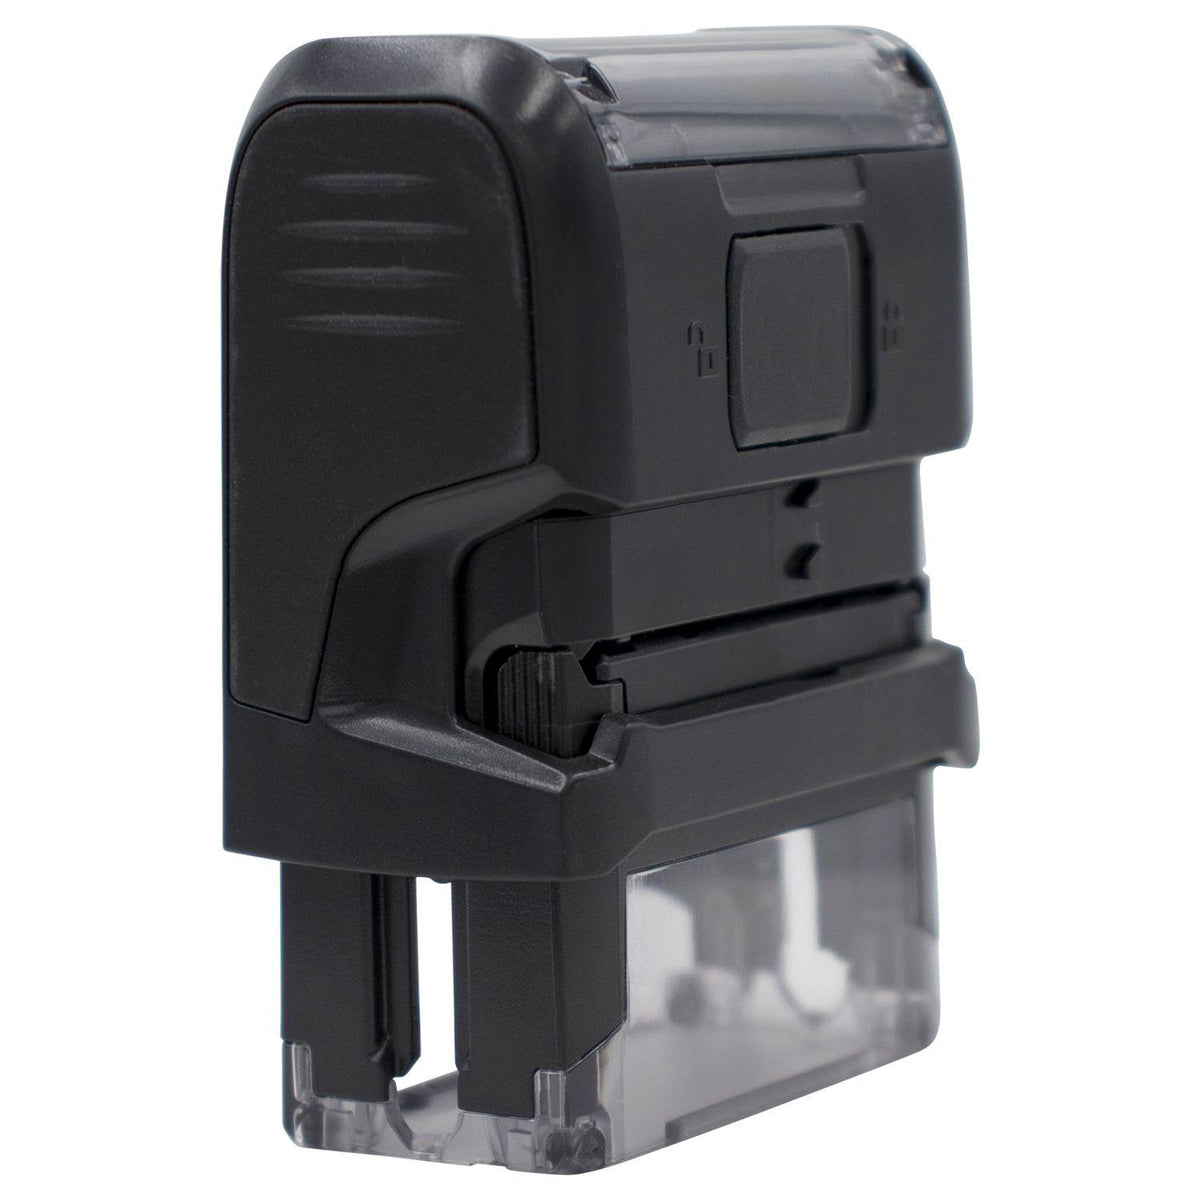 Self Inking Fax It 1 Stamp - Engineer Seal Stamps - Brand_Trodat, Impression Size_Large, Stamp Type_Self-Inking Stamp, Type of Use_Office